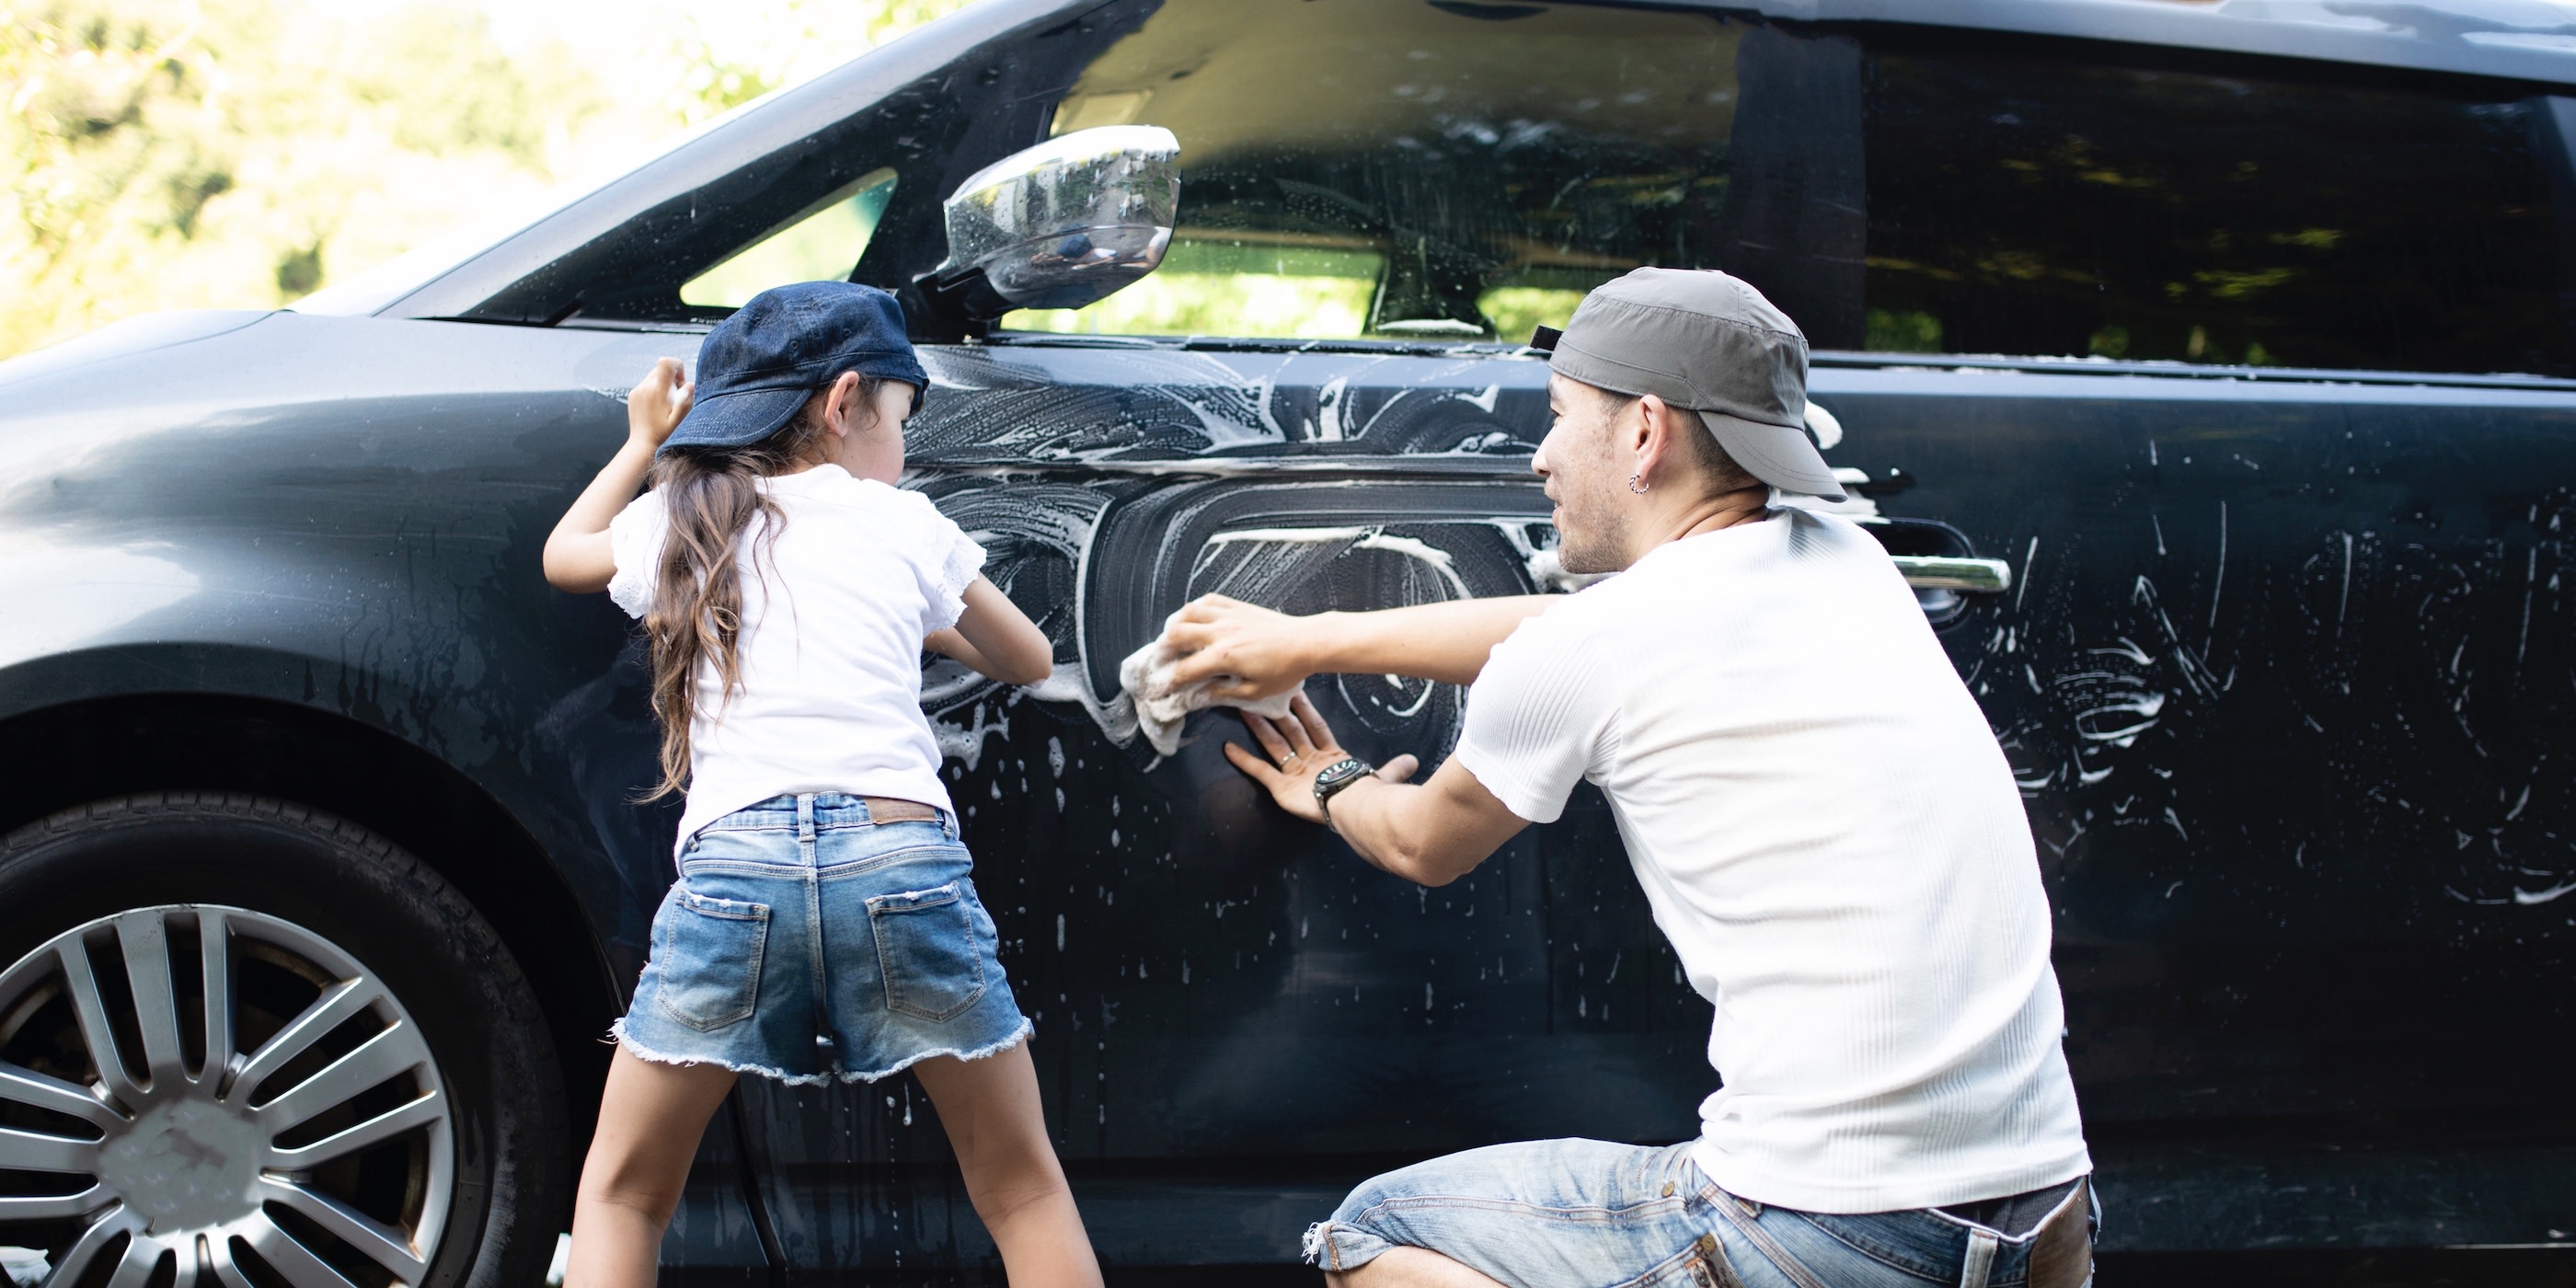 How to Remove Car Wax Like a Pro After Auto Detailing Training